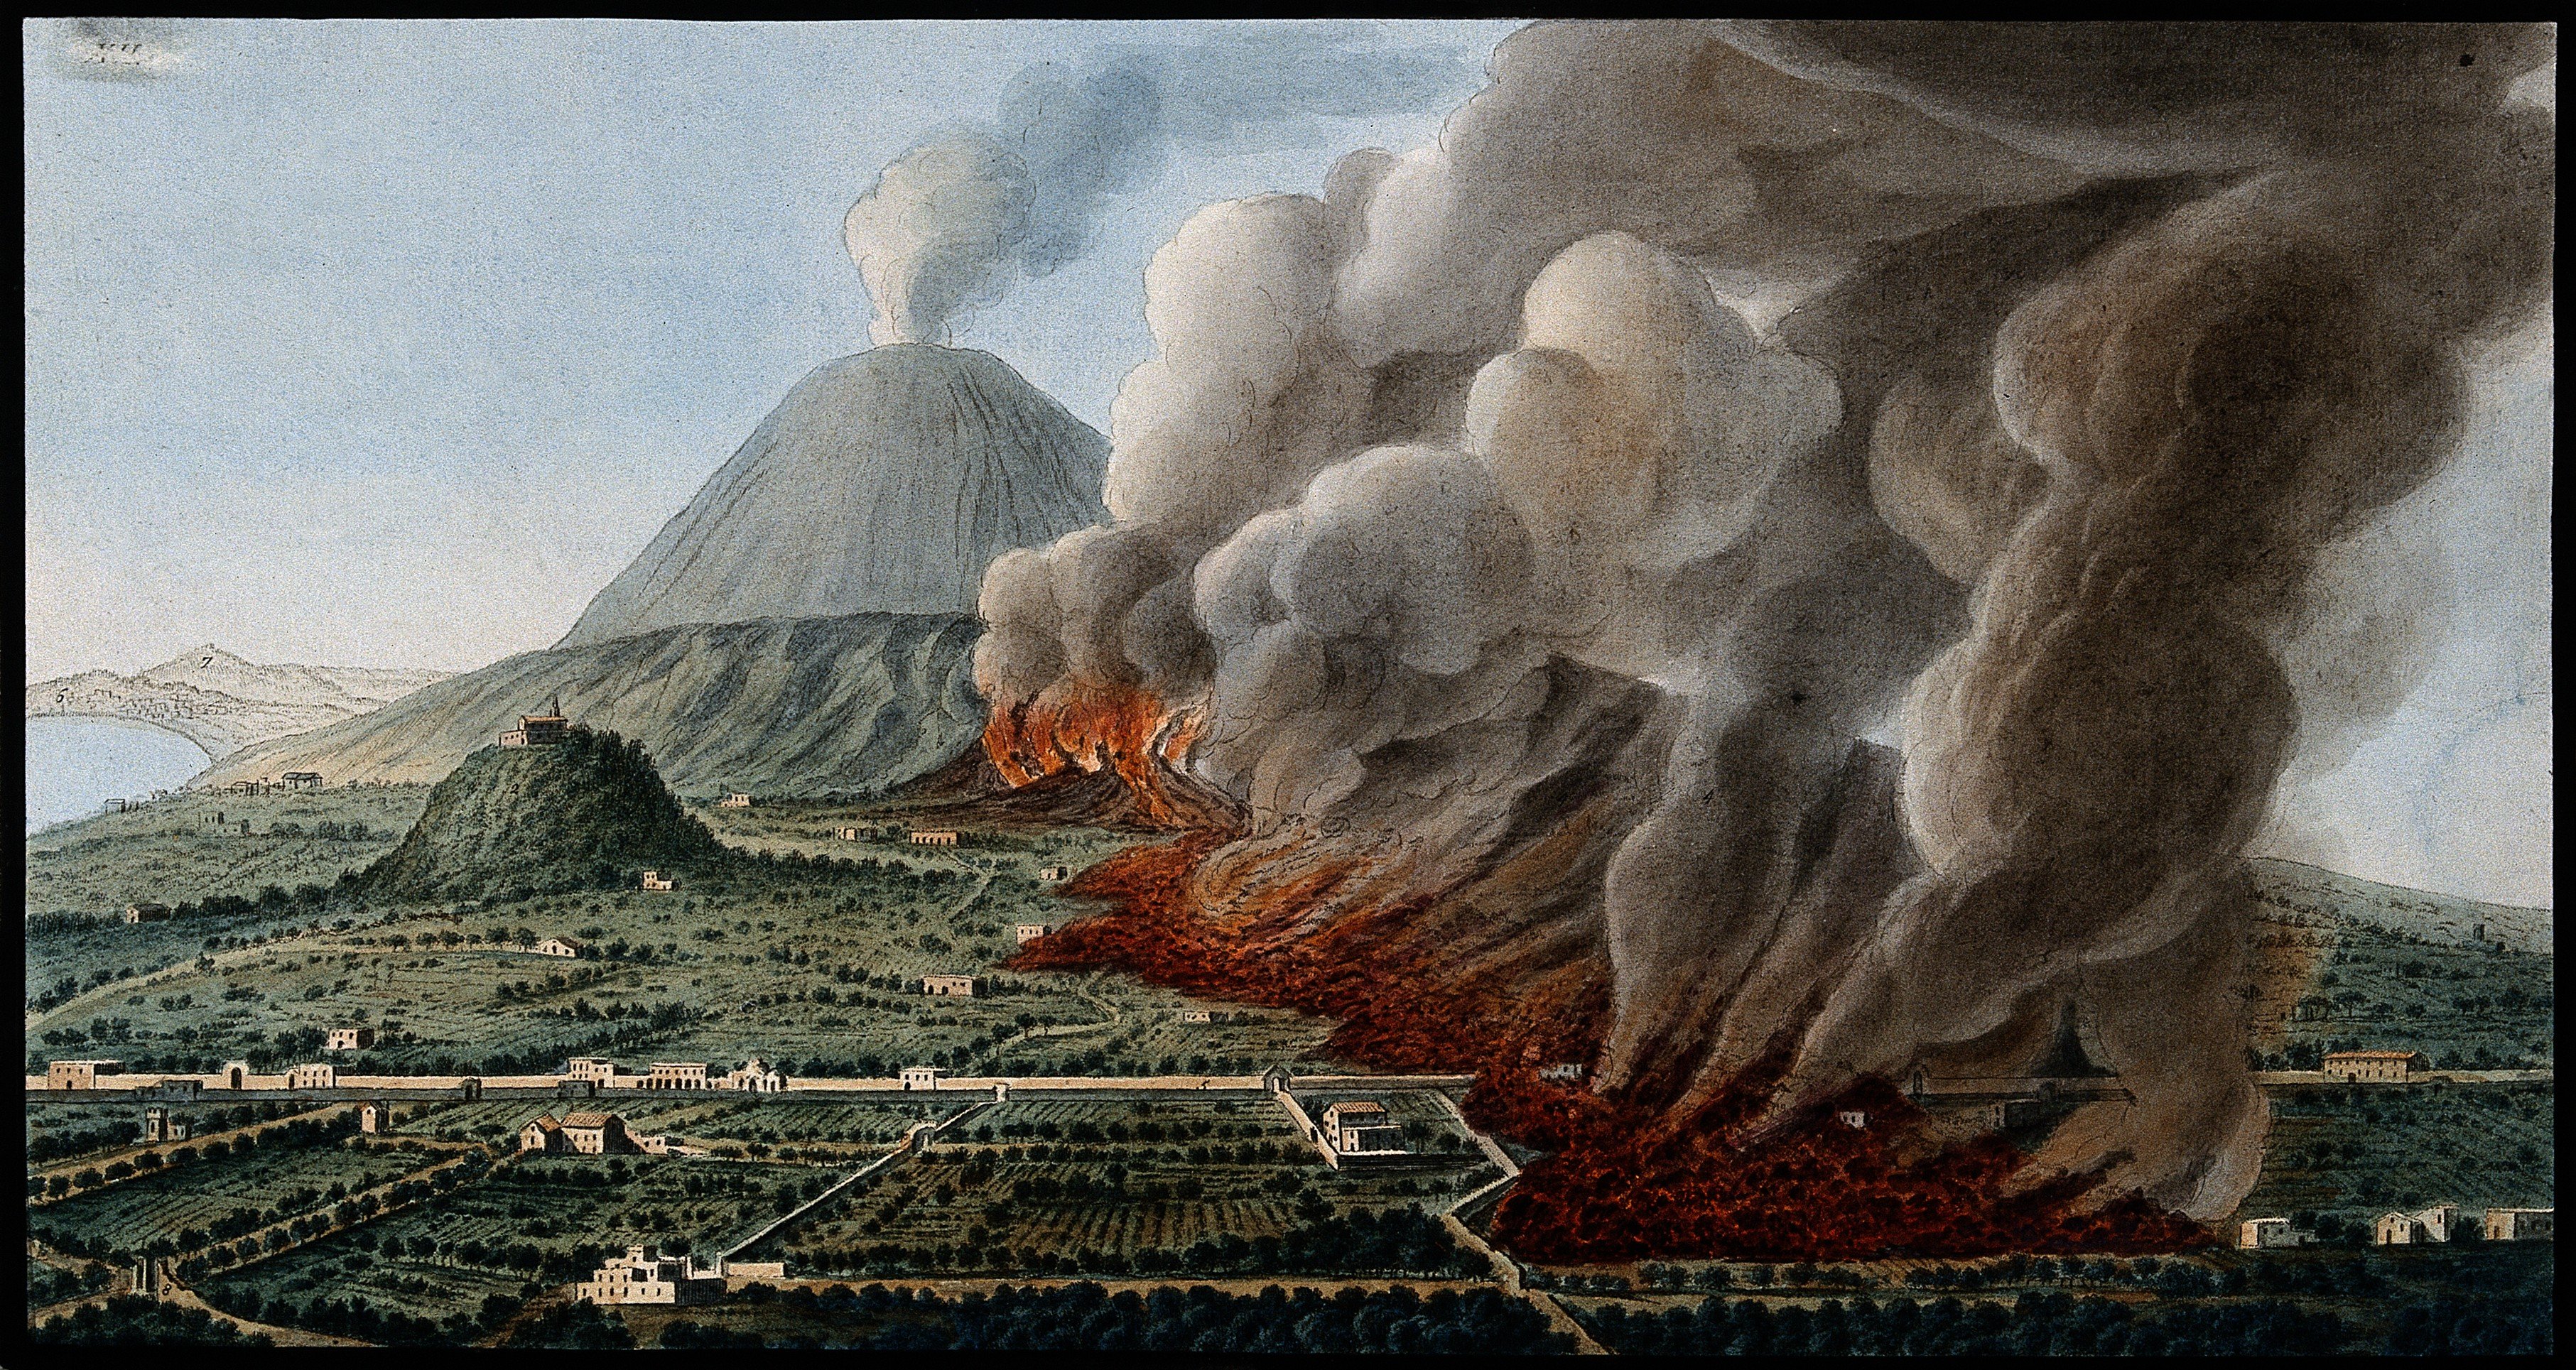 Mount Vesuvius: a volcanic eruption at the foot of the mountain | Source: Wikimedia Commons